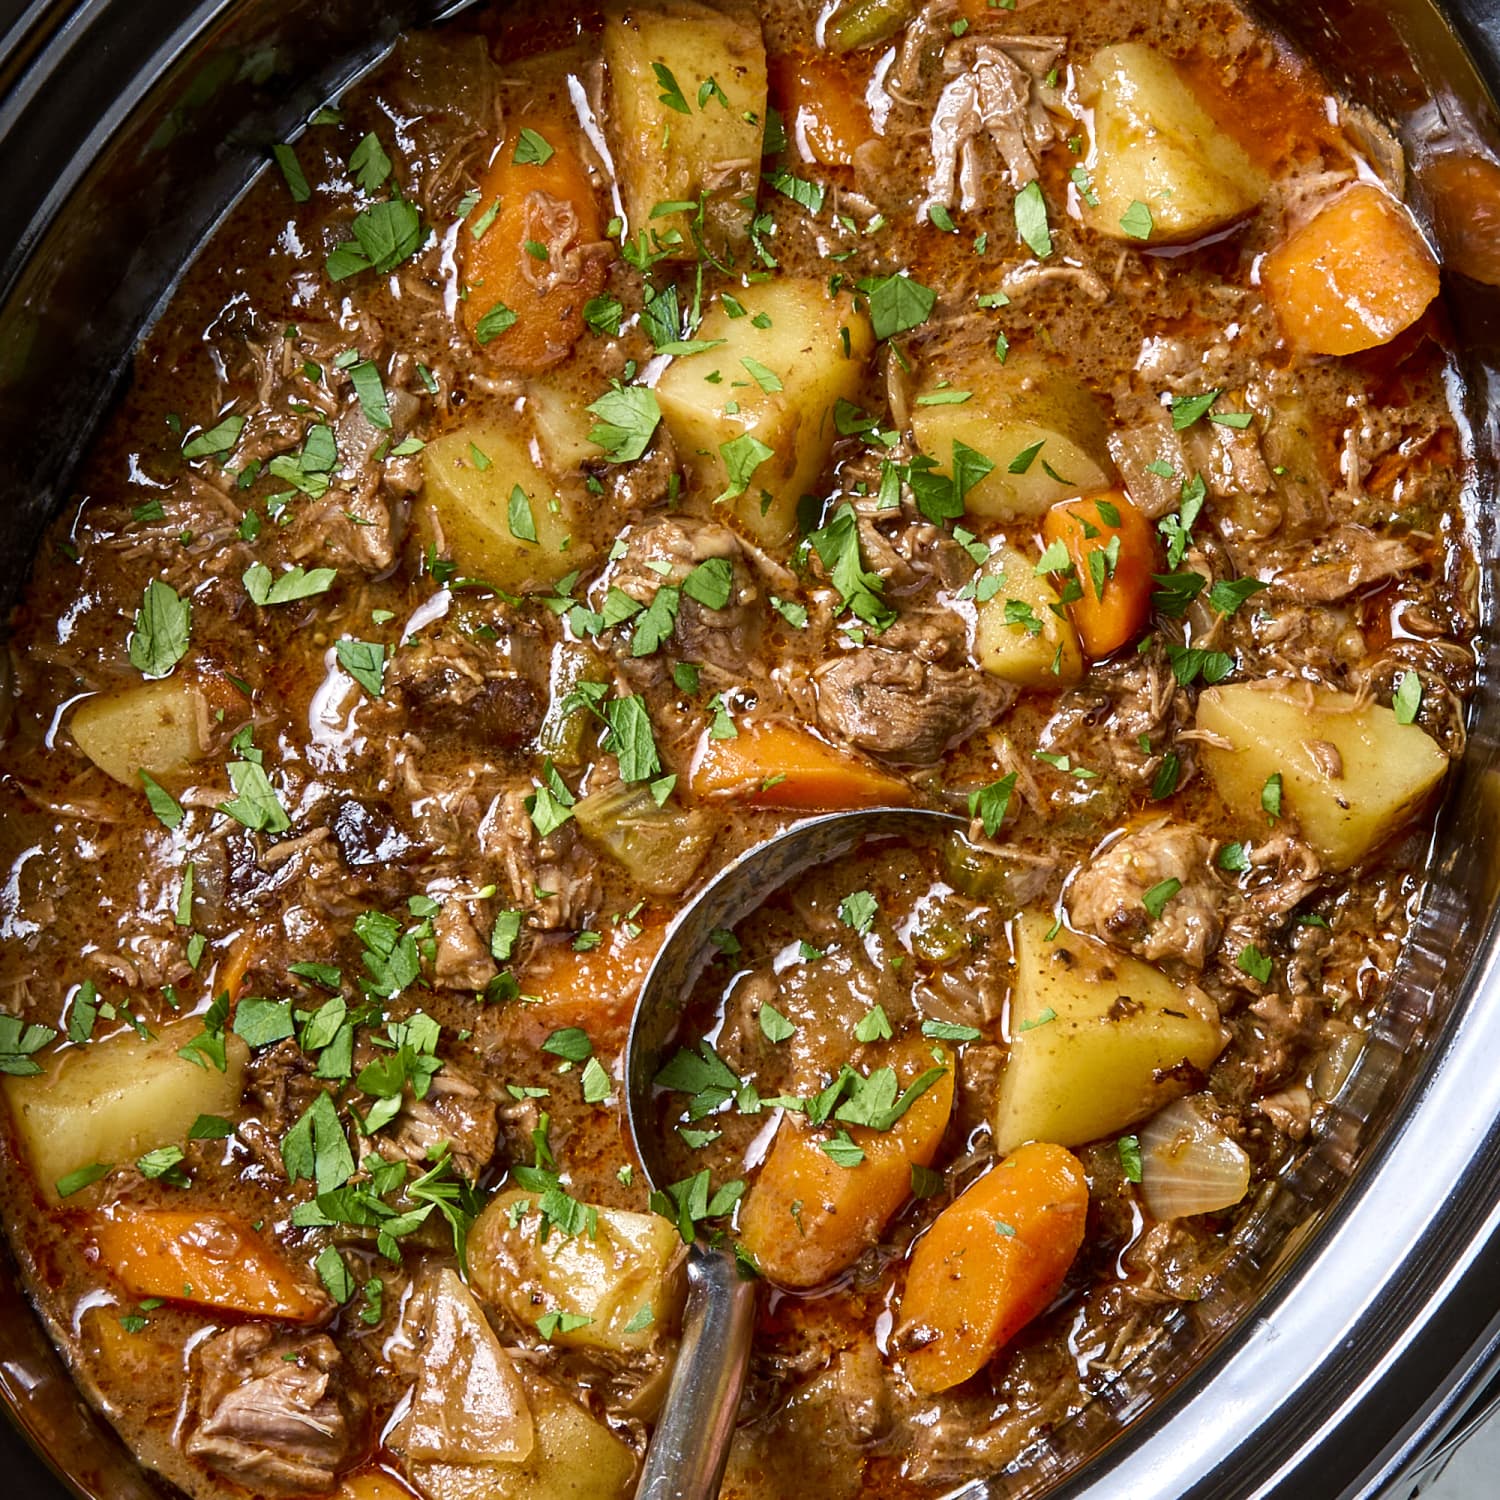 https://cdn.apartmenttherapy.info/image/upload/f_jpg,q_auto:eco,c_fill,g_auto,w_1500,ar_1:1/k%2FPhoto%2FRecipes%2F2023-12-slow-cooker-beef-stew%2Fslow-cooker-beef-stew-129